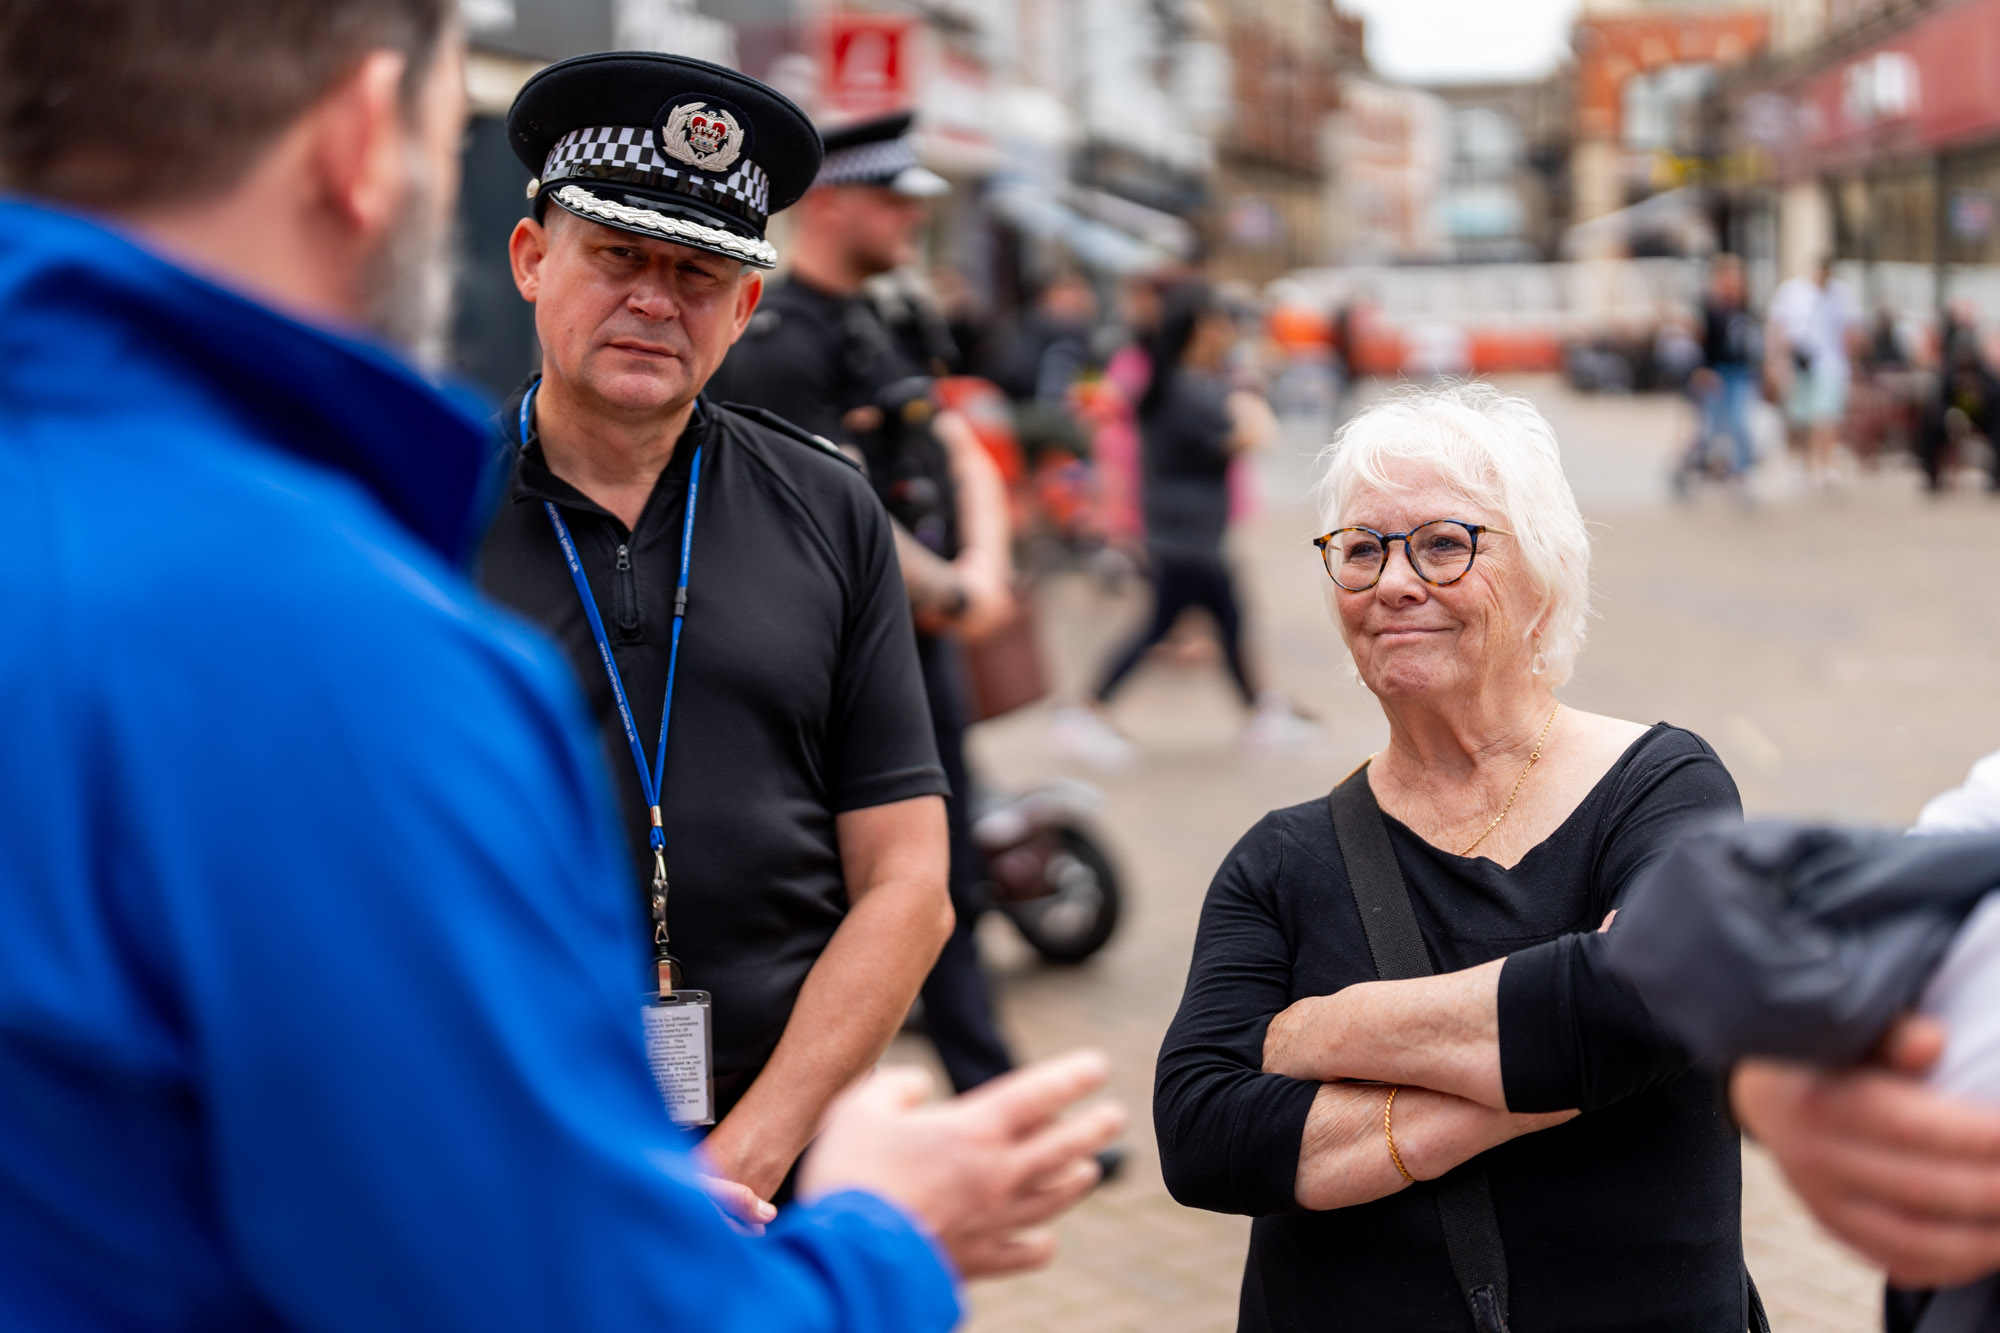 Police, Fire and Crime Commissioner Danielle Stone is pictured on the right wearing a black dress. Next to her, wearing a black police unfiform and hat, is Chief Constable Ivan Balhatchet. On the left, blurred in the foreground, is a man wearing a blue jacket facing them.